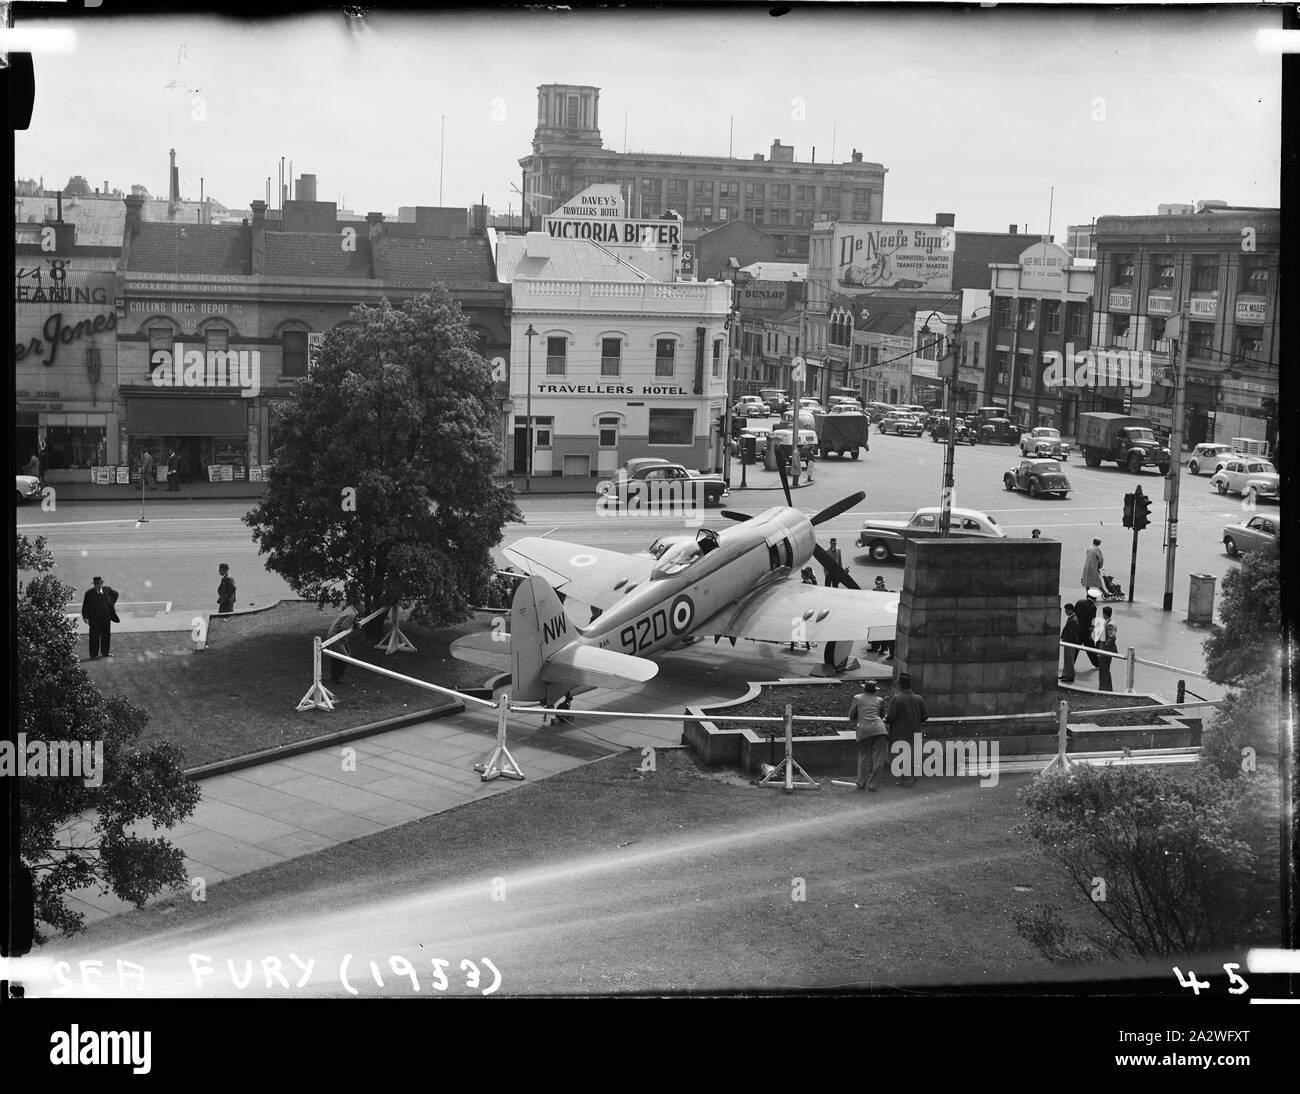 Glass Negative - Sea Fury Military Bomber Aircraft, Museum of Applied Science of Victoria (Science Museum), Melbourne, 1953, Photograph of the Royal Australian Navy's Sea Fury Aircraft outside the Museum of Applied Science of Victoria, corner of Swanston and Bourke Street, 1953. The Sea Fury was loaned by the Royal Australian Navy for the Jubilee of Flight Exhibition. The exhibition commemorated fifty years of aviation, and was open from Dec 10 1953 to Feb 1954 Stock Photo